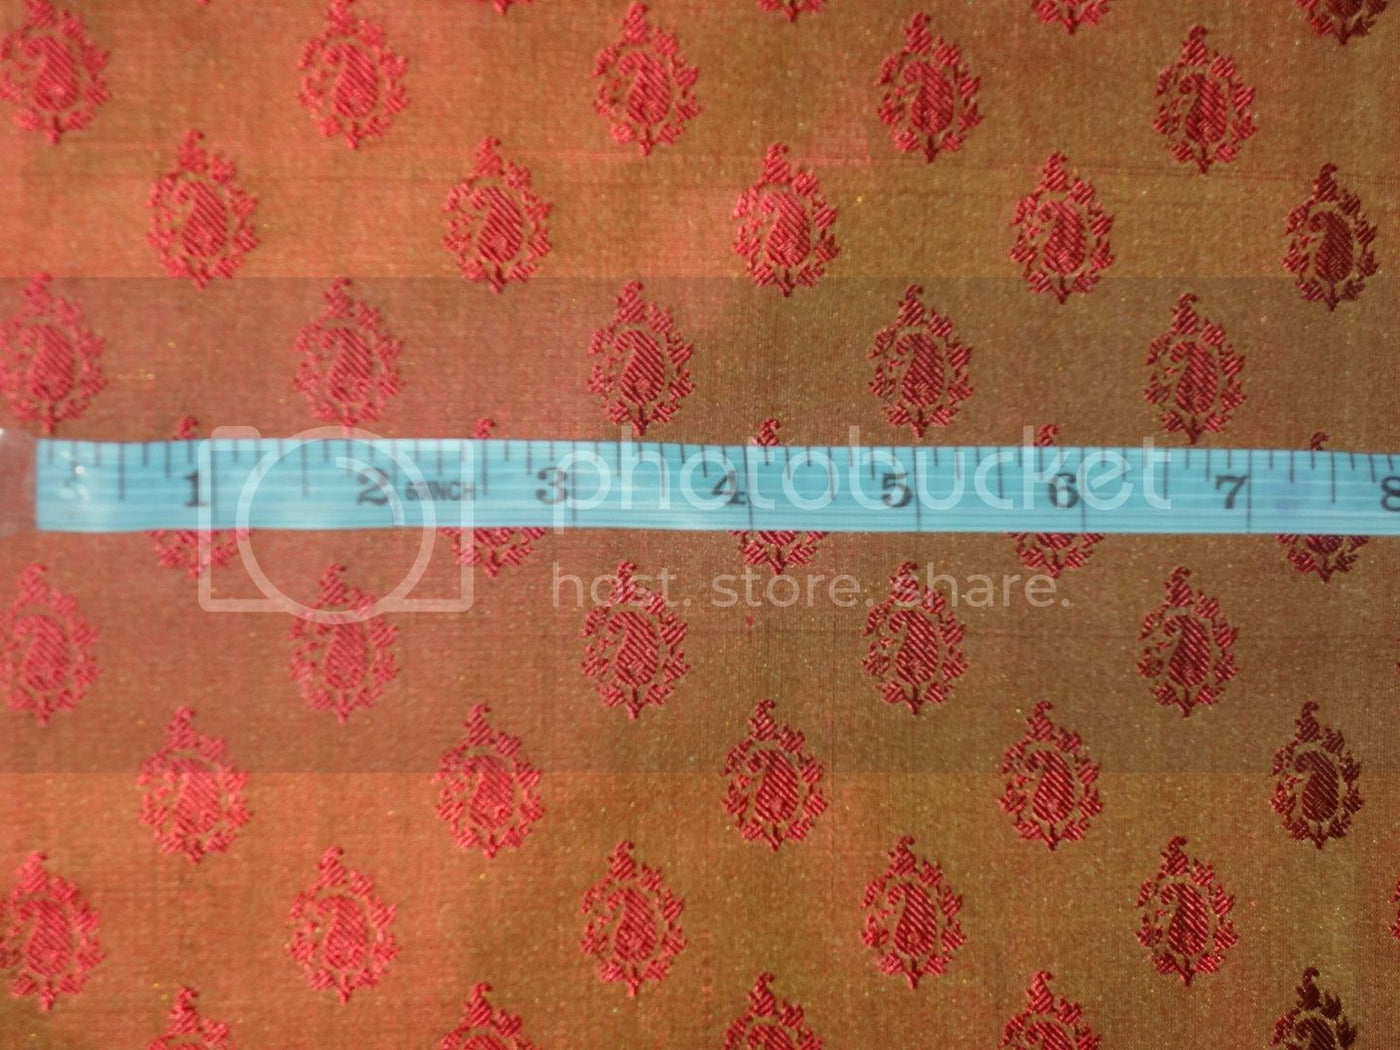 Pure SILK BROCADE FABRIC Golden Olive Green & Rusty Red colour 44" wide BRO235[1]